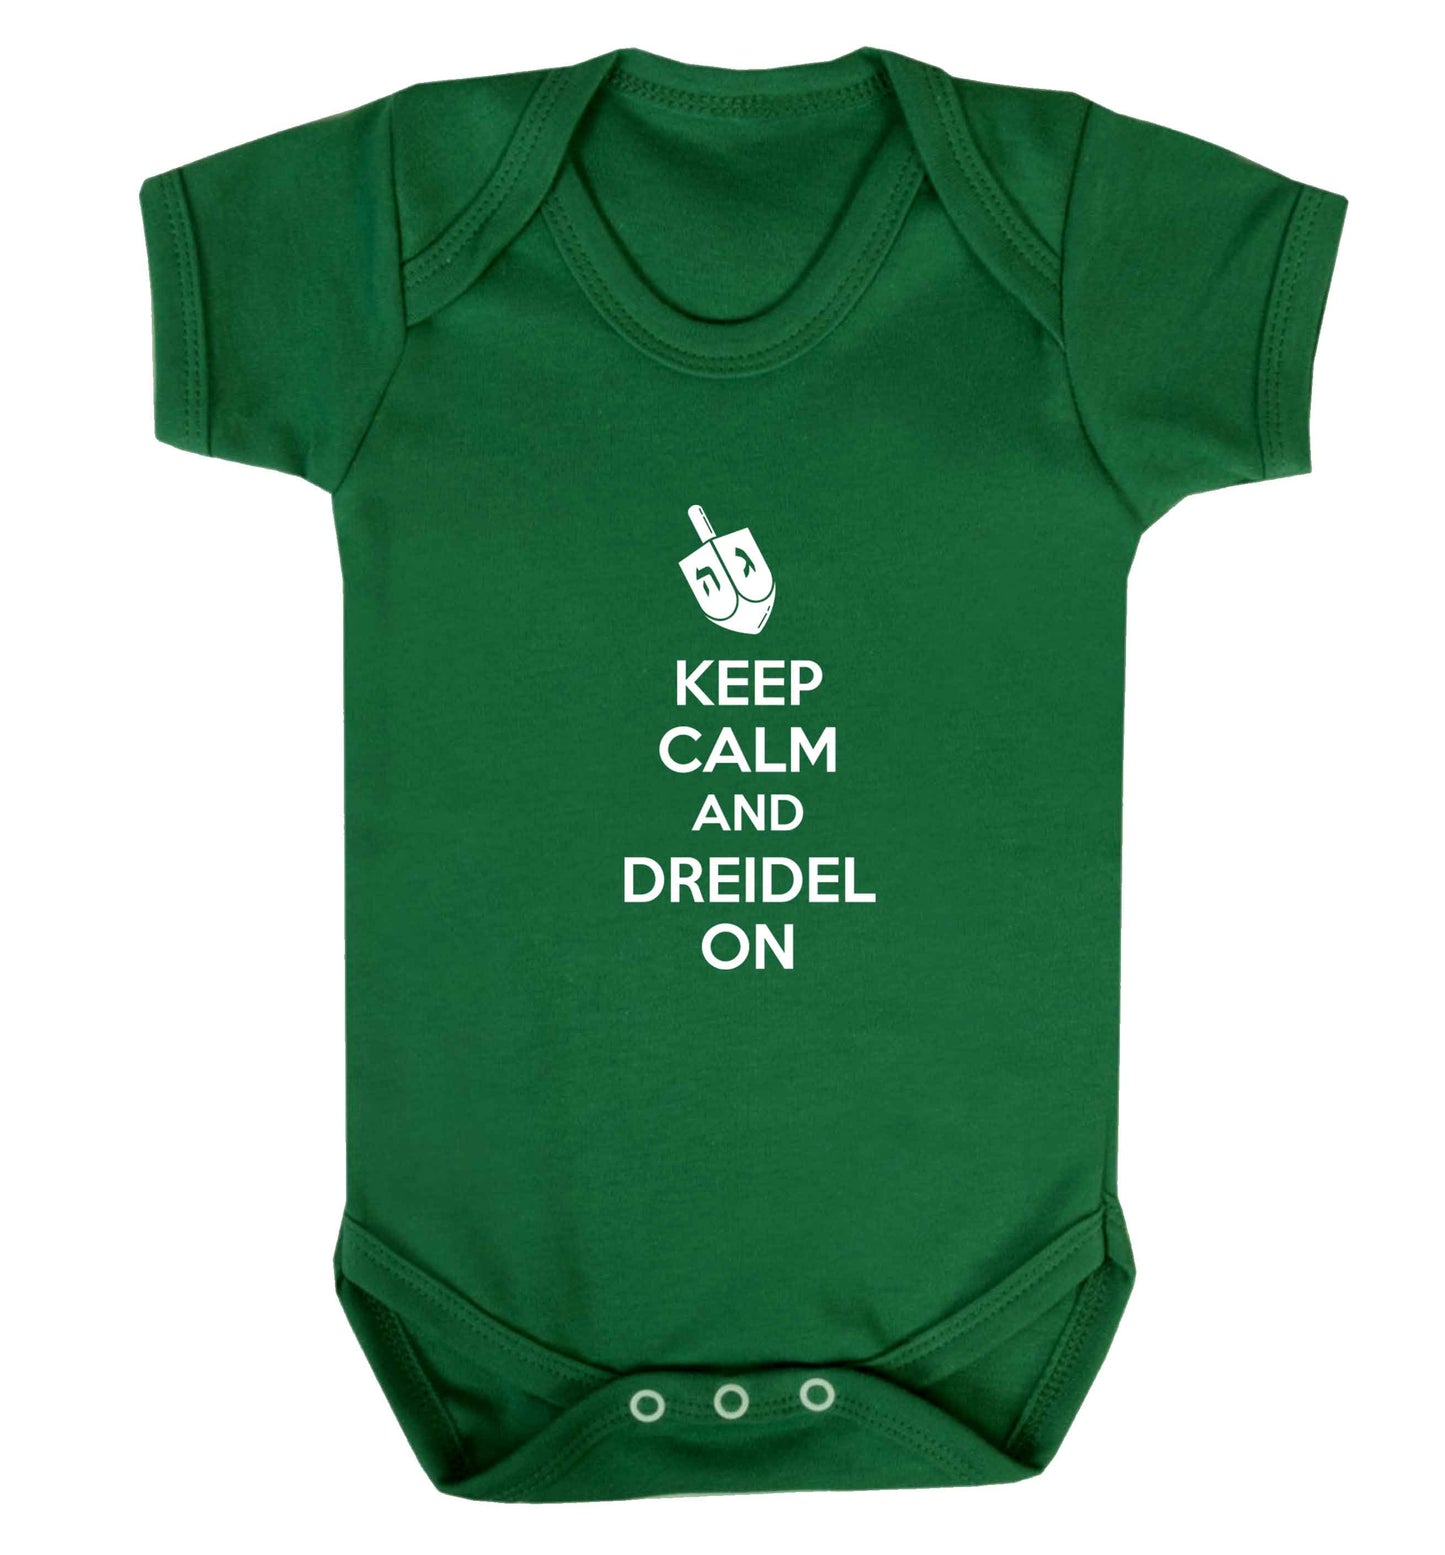 Keep calm and dreidel on baby vest green 18-24 months